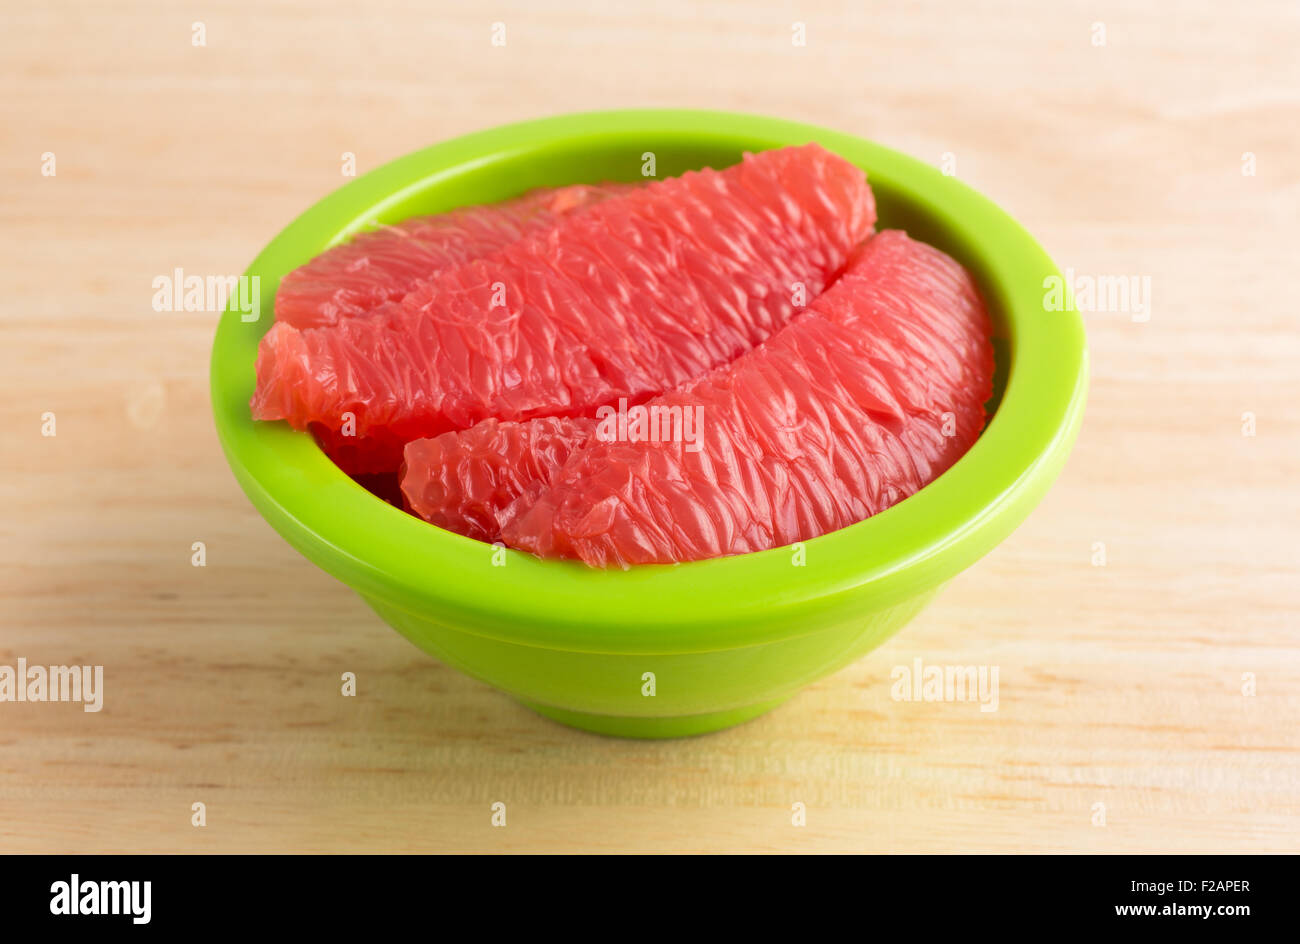 Sections of red grapefruit in a green bowl on a wood table top. Stock Photo